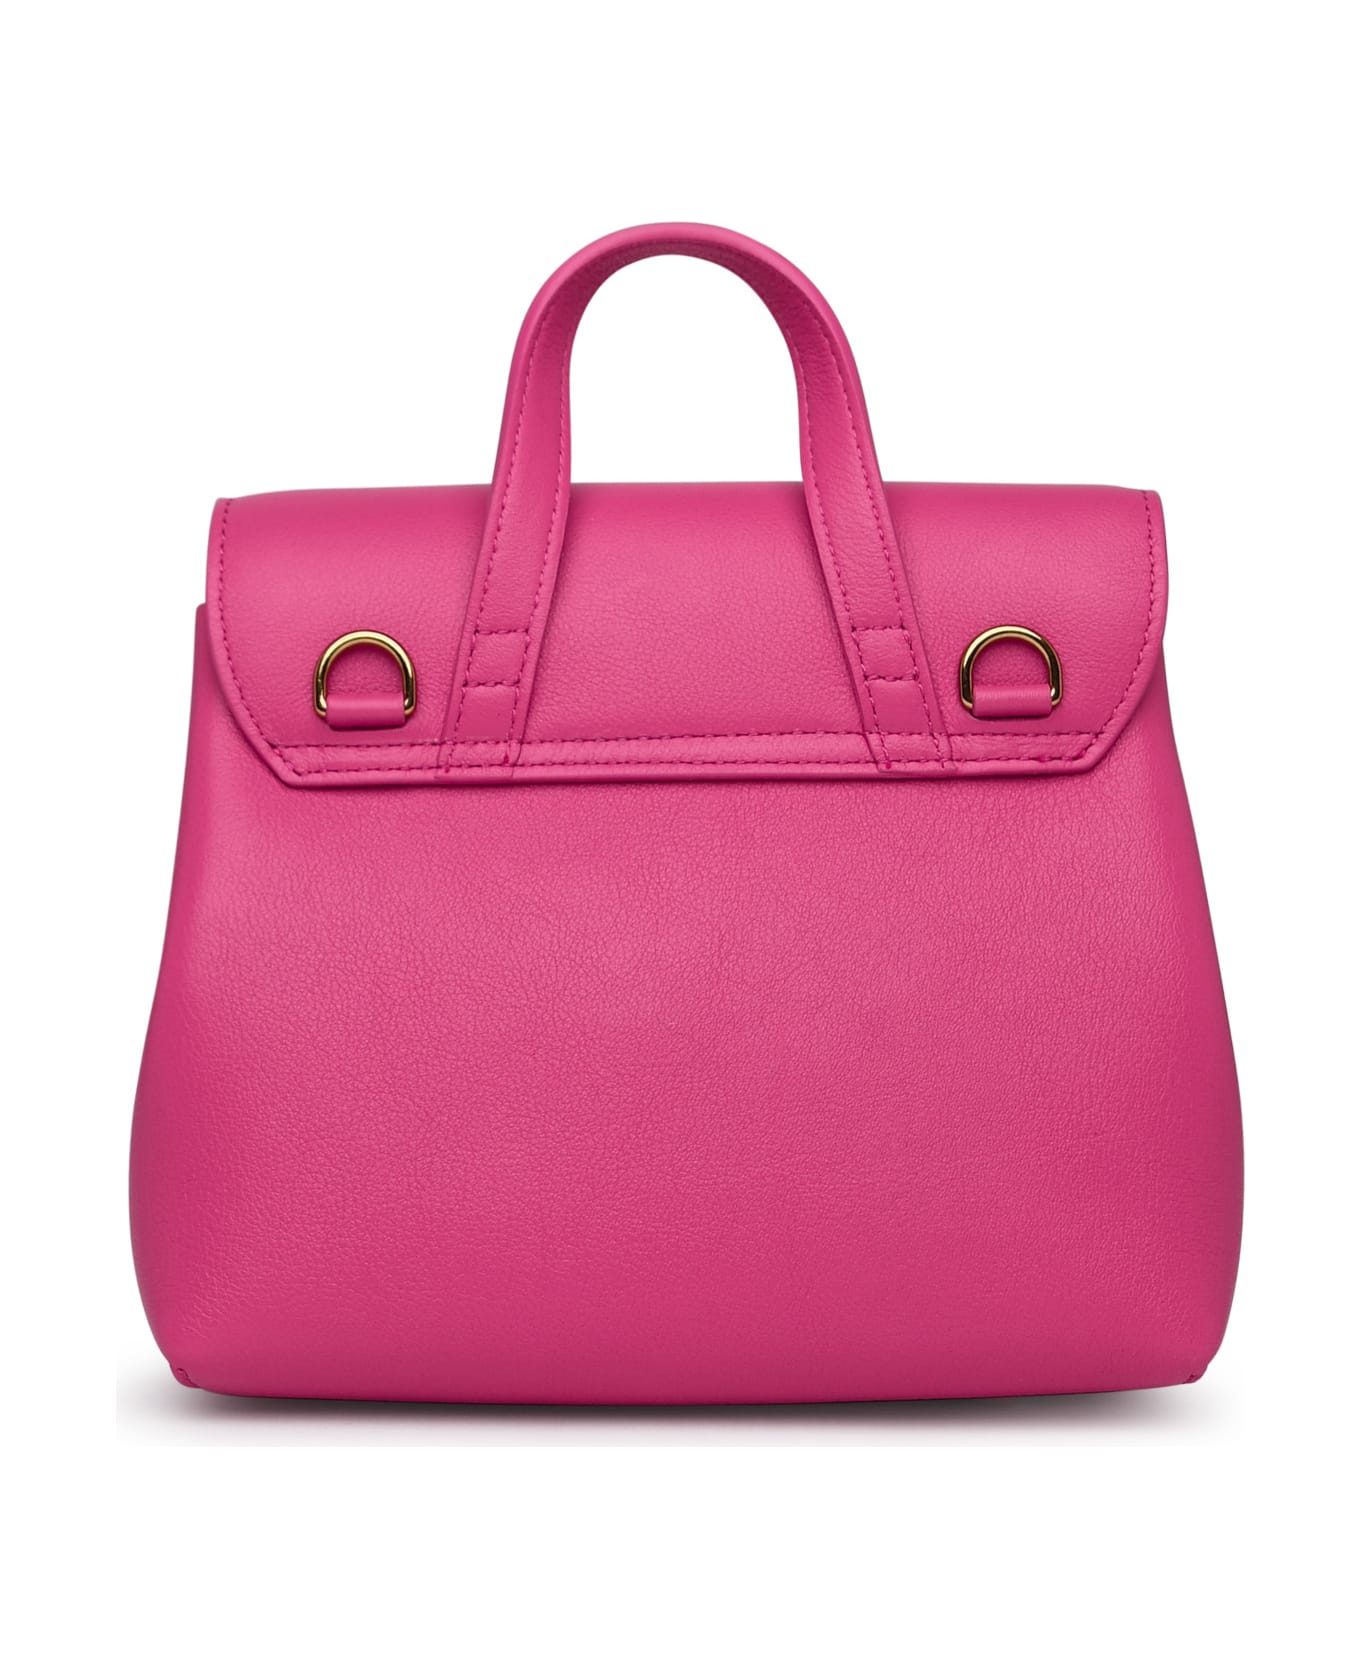 Mansur Gavriel Small 'lady Soft' Bag In Pink Leather - Pink バックパック